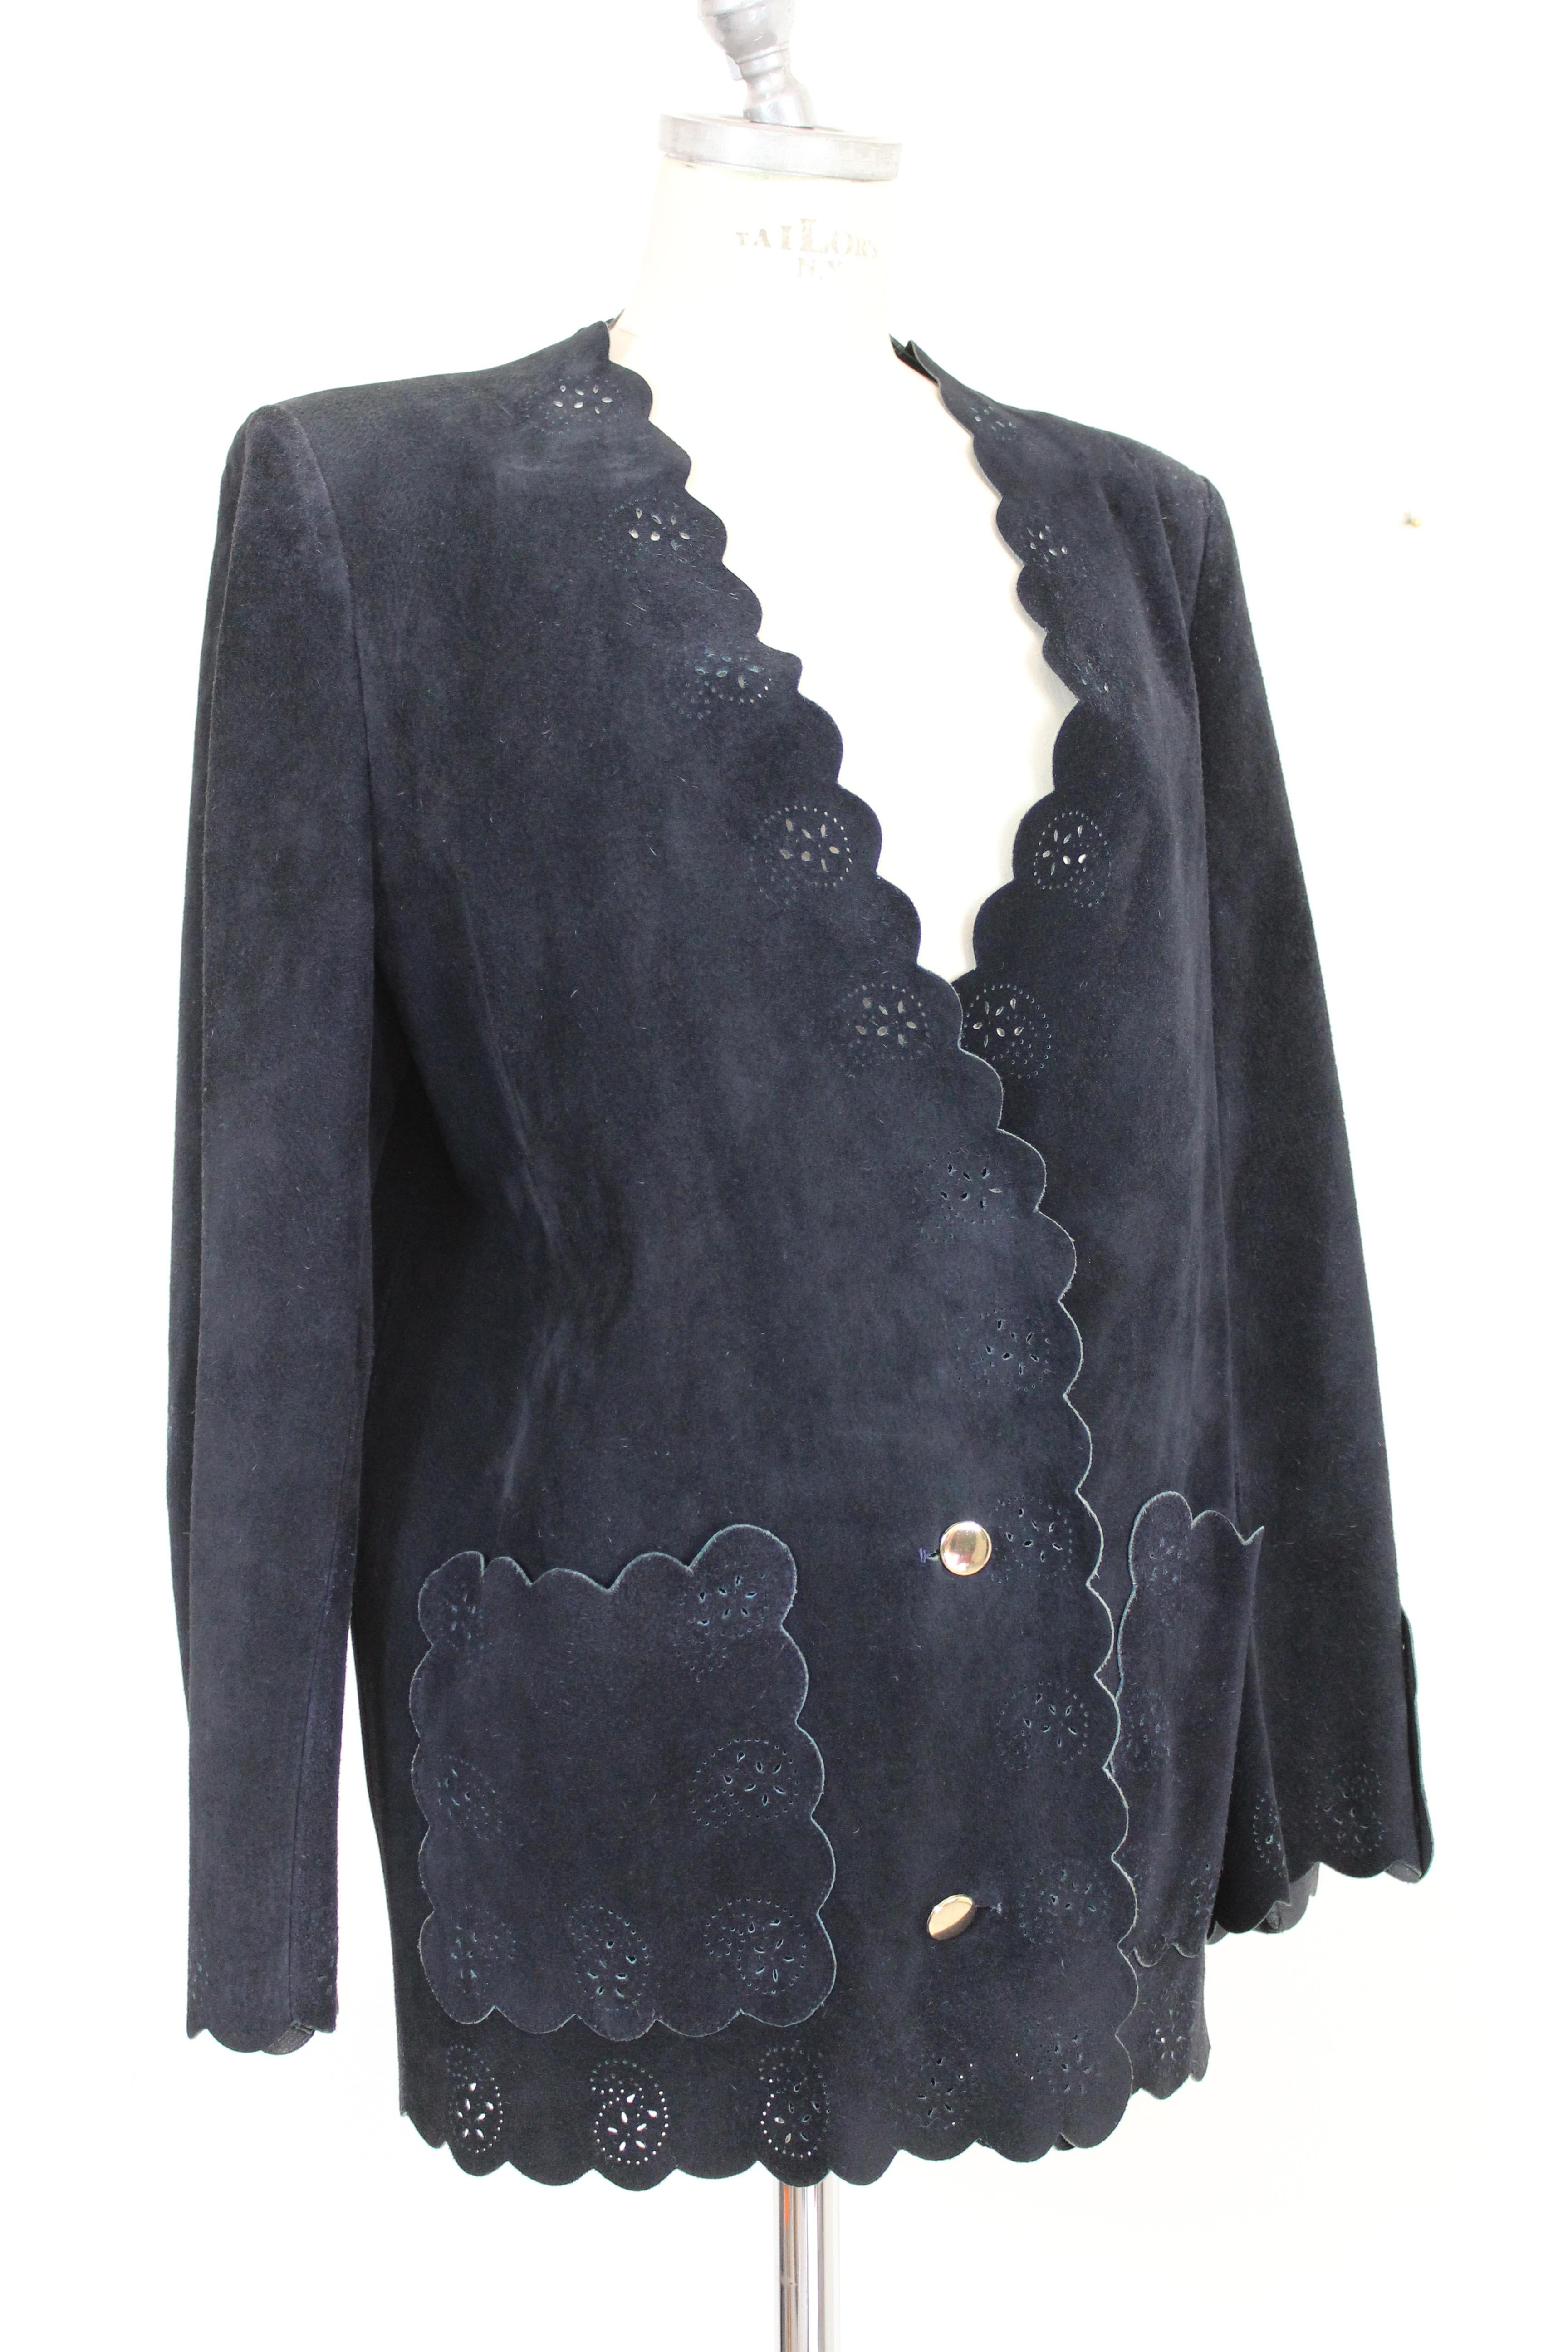 Roberta di Camerino Blu Leather Suede Jacket 1980s In Excellent Condition In Brindisi, Bt